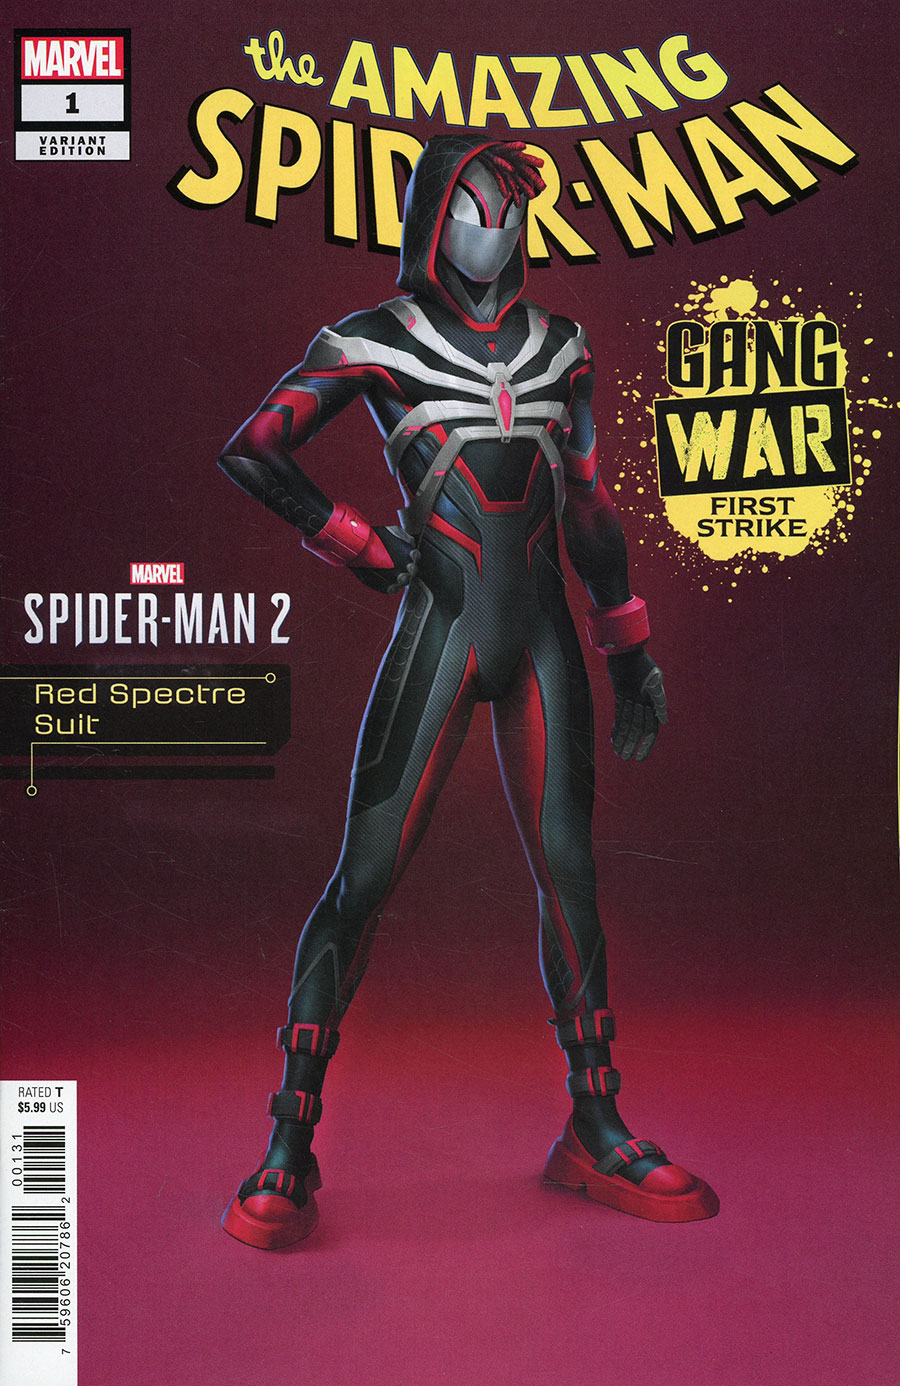 Amazing Spider-Man Gang War First Strike #1 (One Shot) Cover C Variant Marvels Spider-Man 2 Video Game Red Spectre Suit Cover